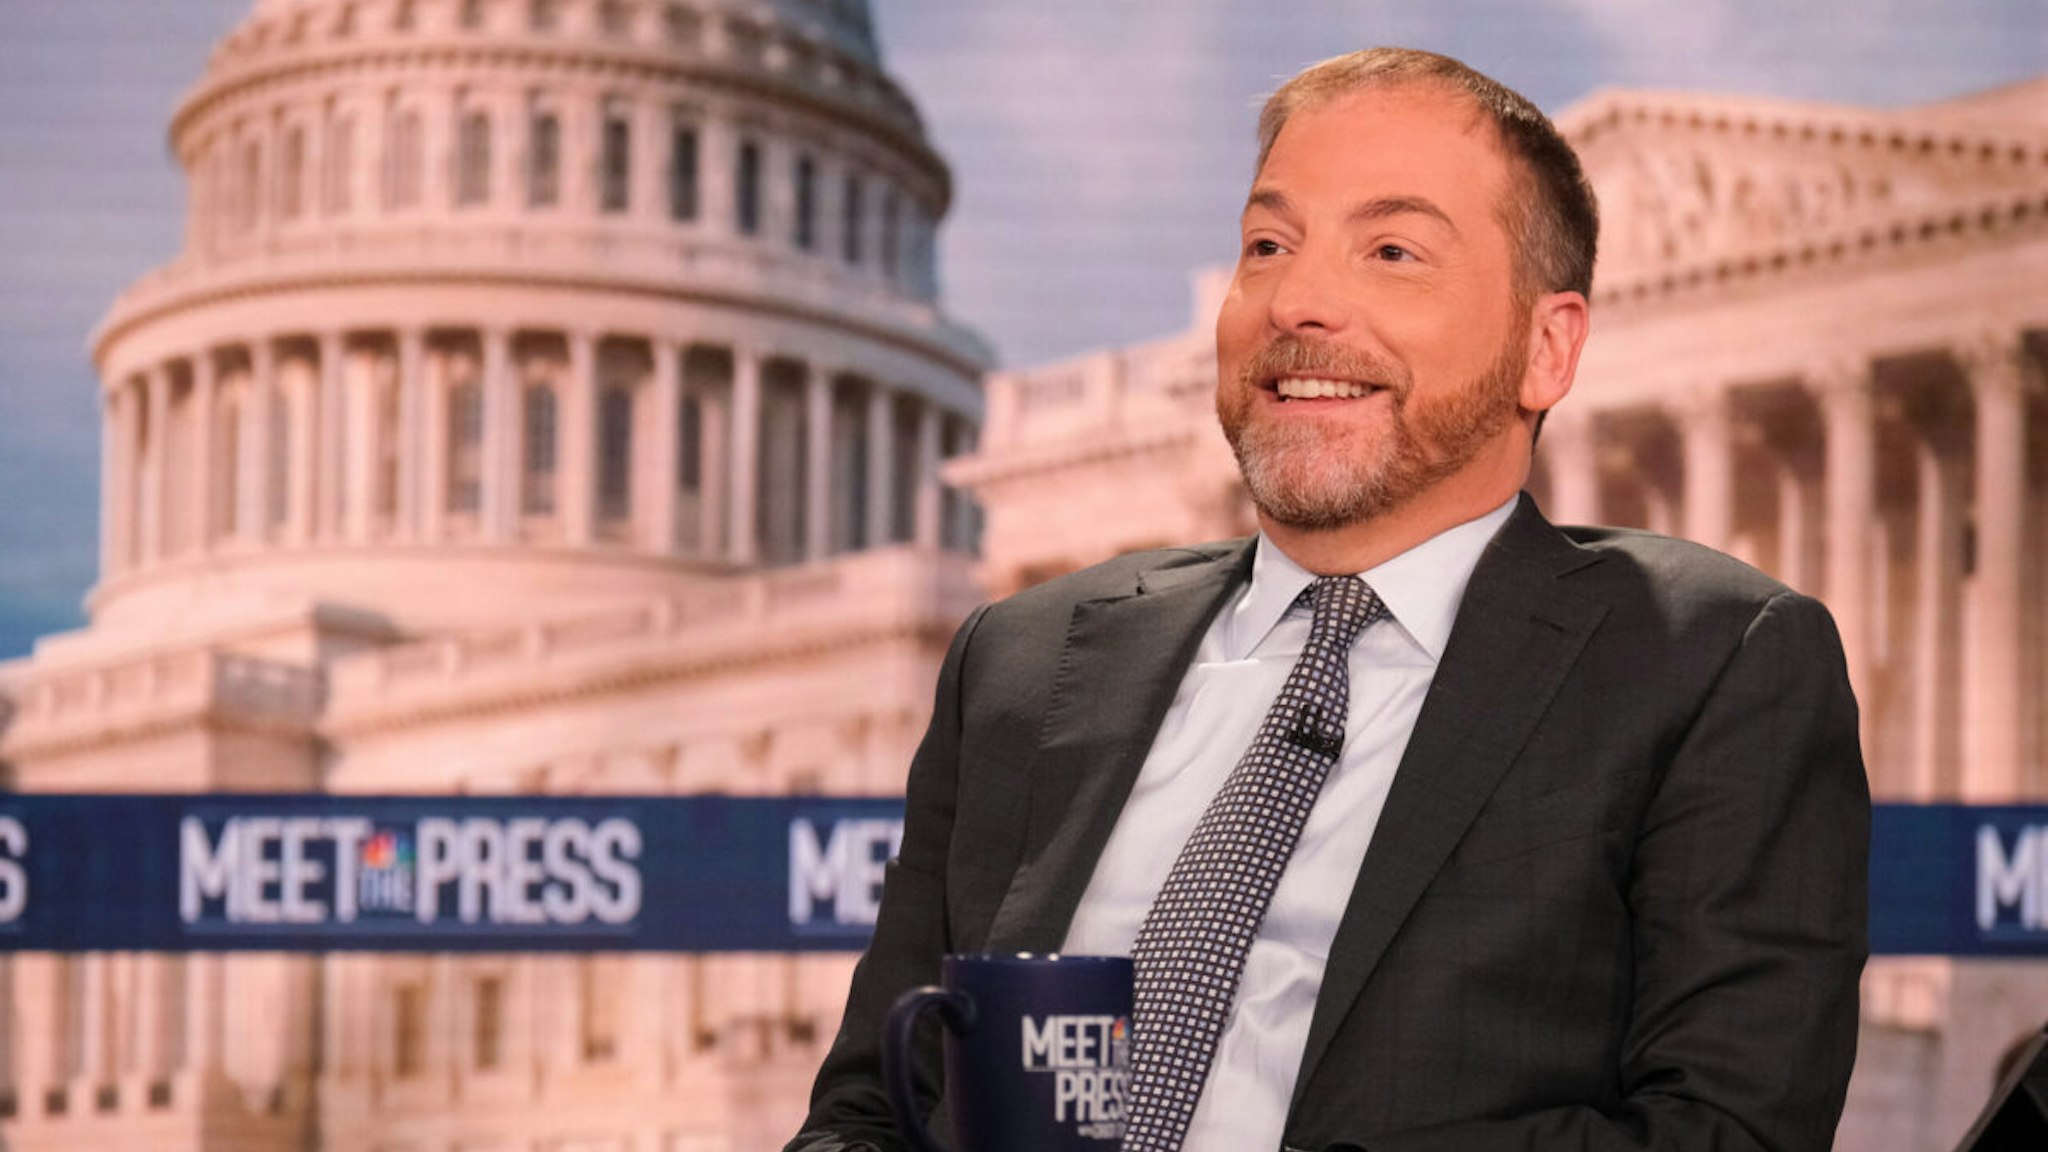 Pictured: Moderator Chuck Todd appears on Meet the Press in Washington, D.C. Sunday, May 8, 2022